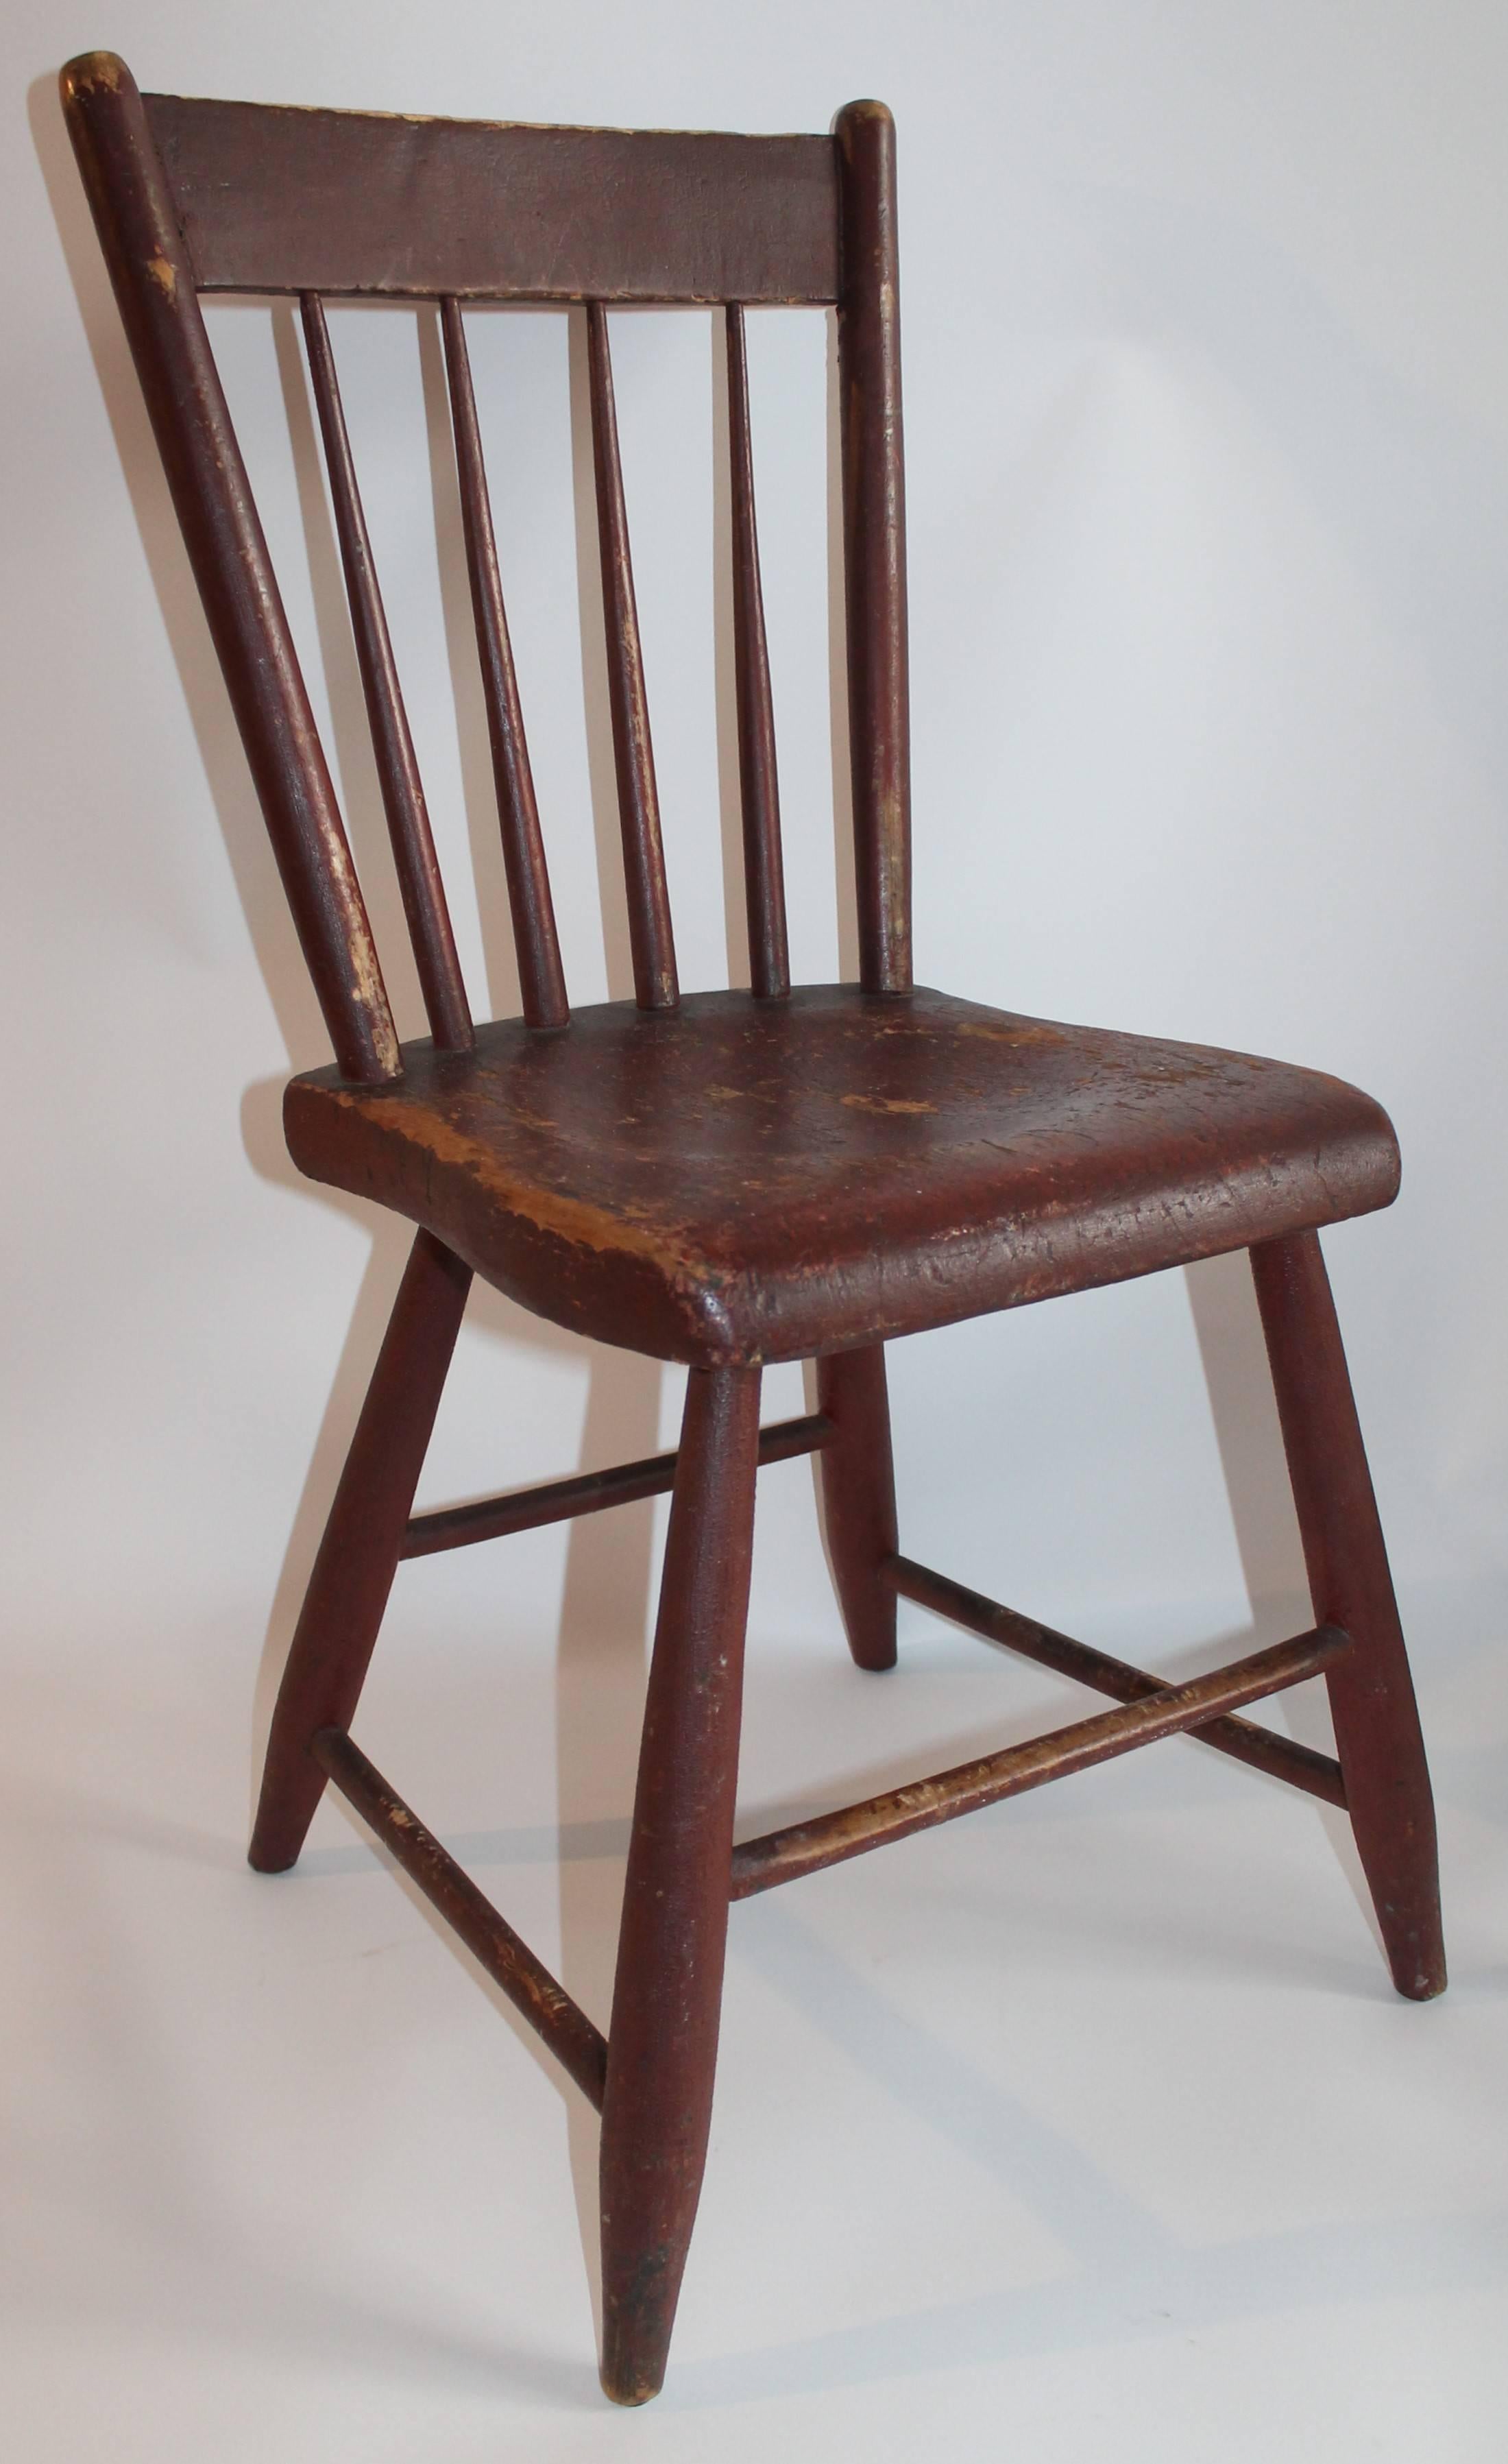 Hand-Crafted 19th Century Original Red Painted Chairs from Pennsylvania, Pair